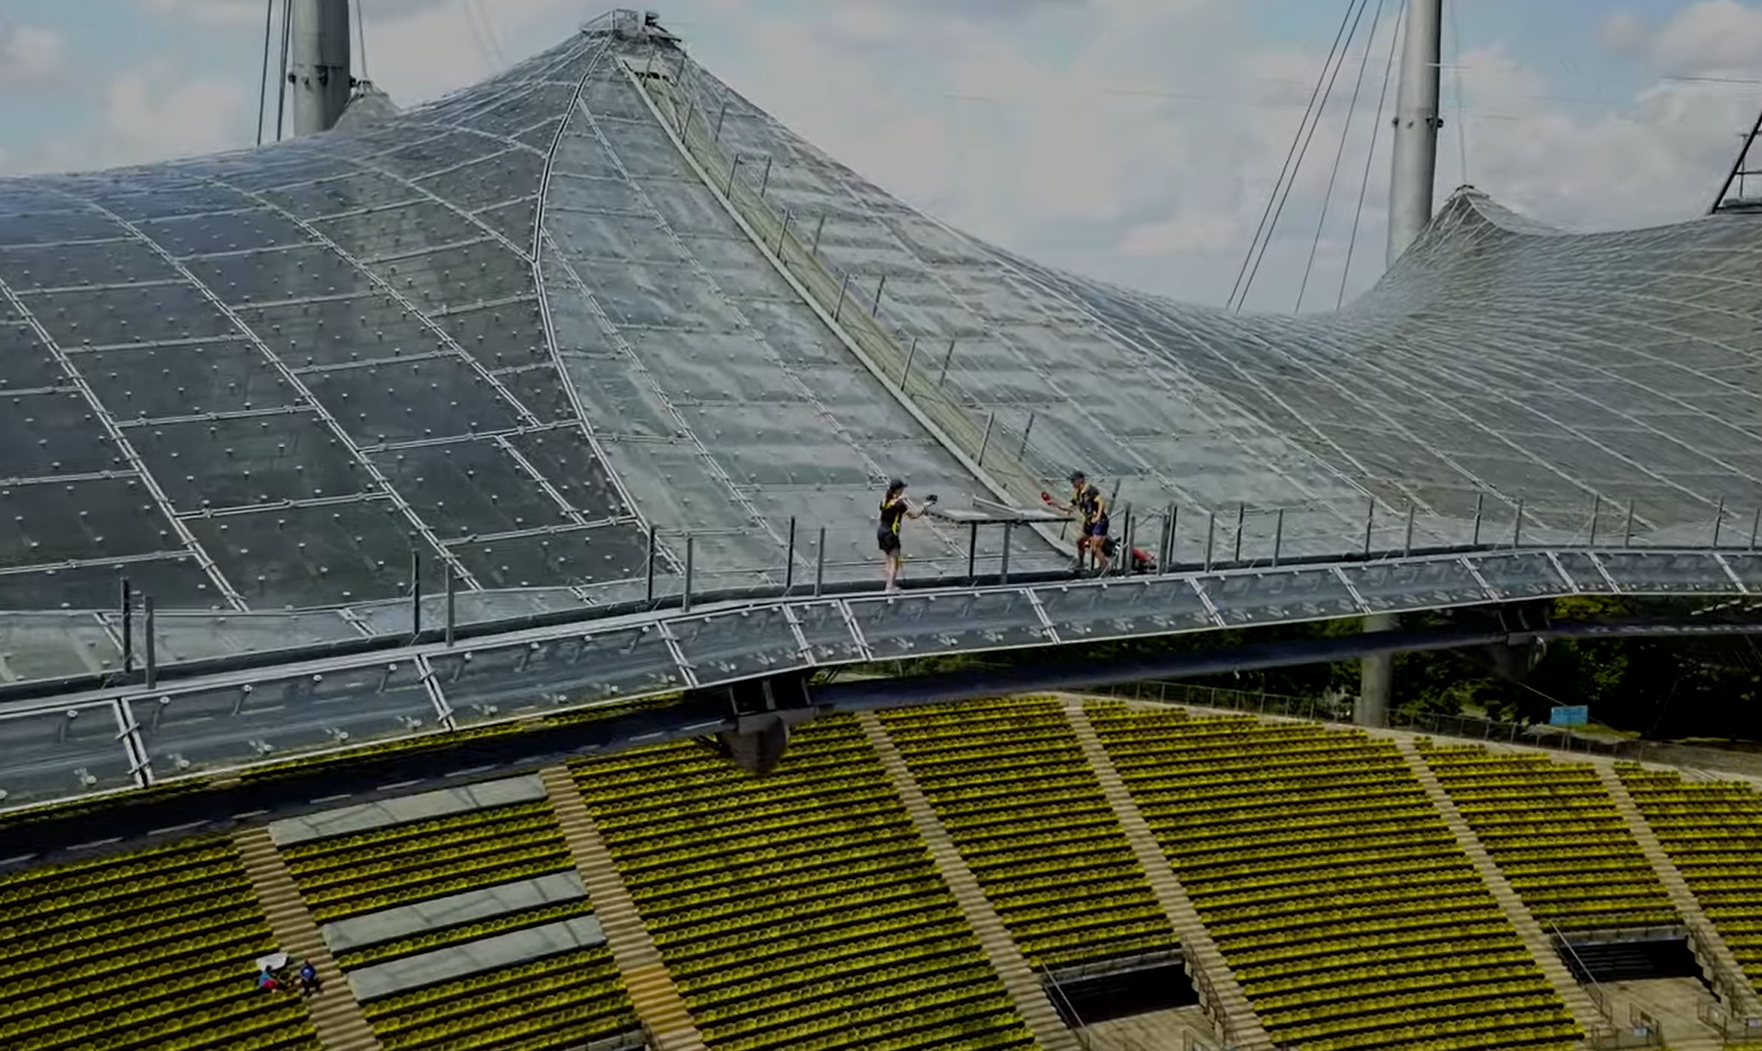 Table tennis played on top of Olympic Stadium in nod to Munich 2022 "Back to the Roofs" slogan